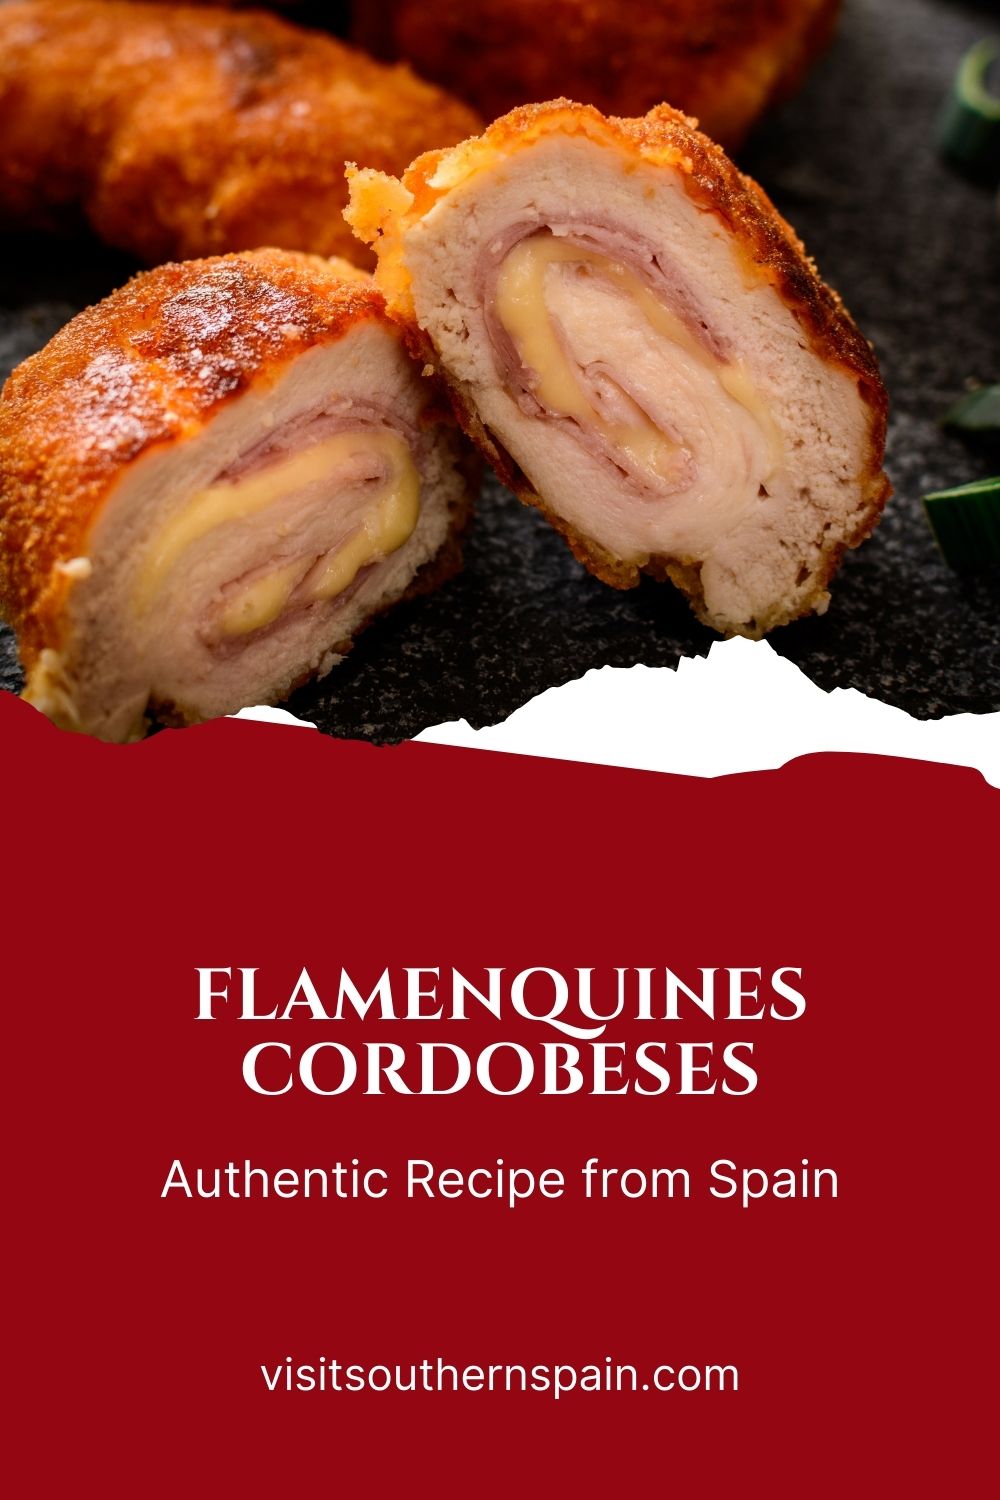 Are you looking for Flamenquines Cordobeses Recipe? Then you must try our recipe for the best cordobeses you've ever eaten. The fried pork roll is a tapas recipe from Cordoba and is a pork loin file filled with savory serrano ham and mozzarella cheese. Once it's fried and you cut into it, you won't be able to stop eating them. The Flamenquín is perfect for a summer dinner party or just as a tapas next to some beers. #flamenquinescordobeses #flamenquin #spanishporkroll #friedporkrolls #tapas